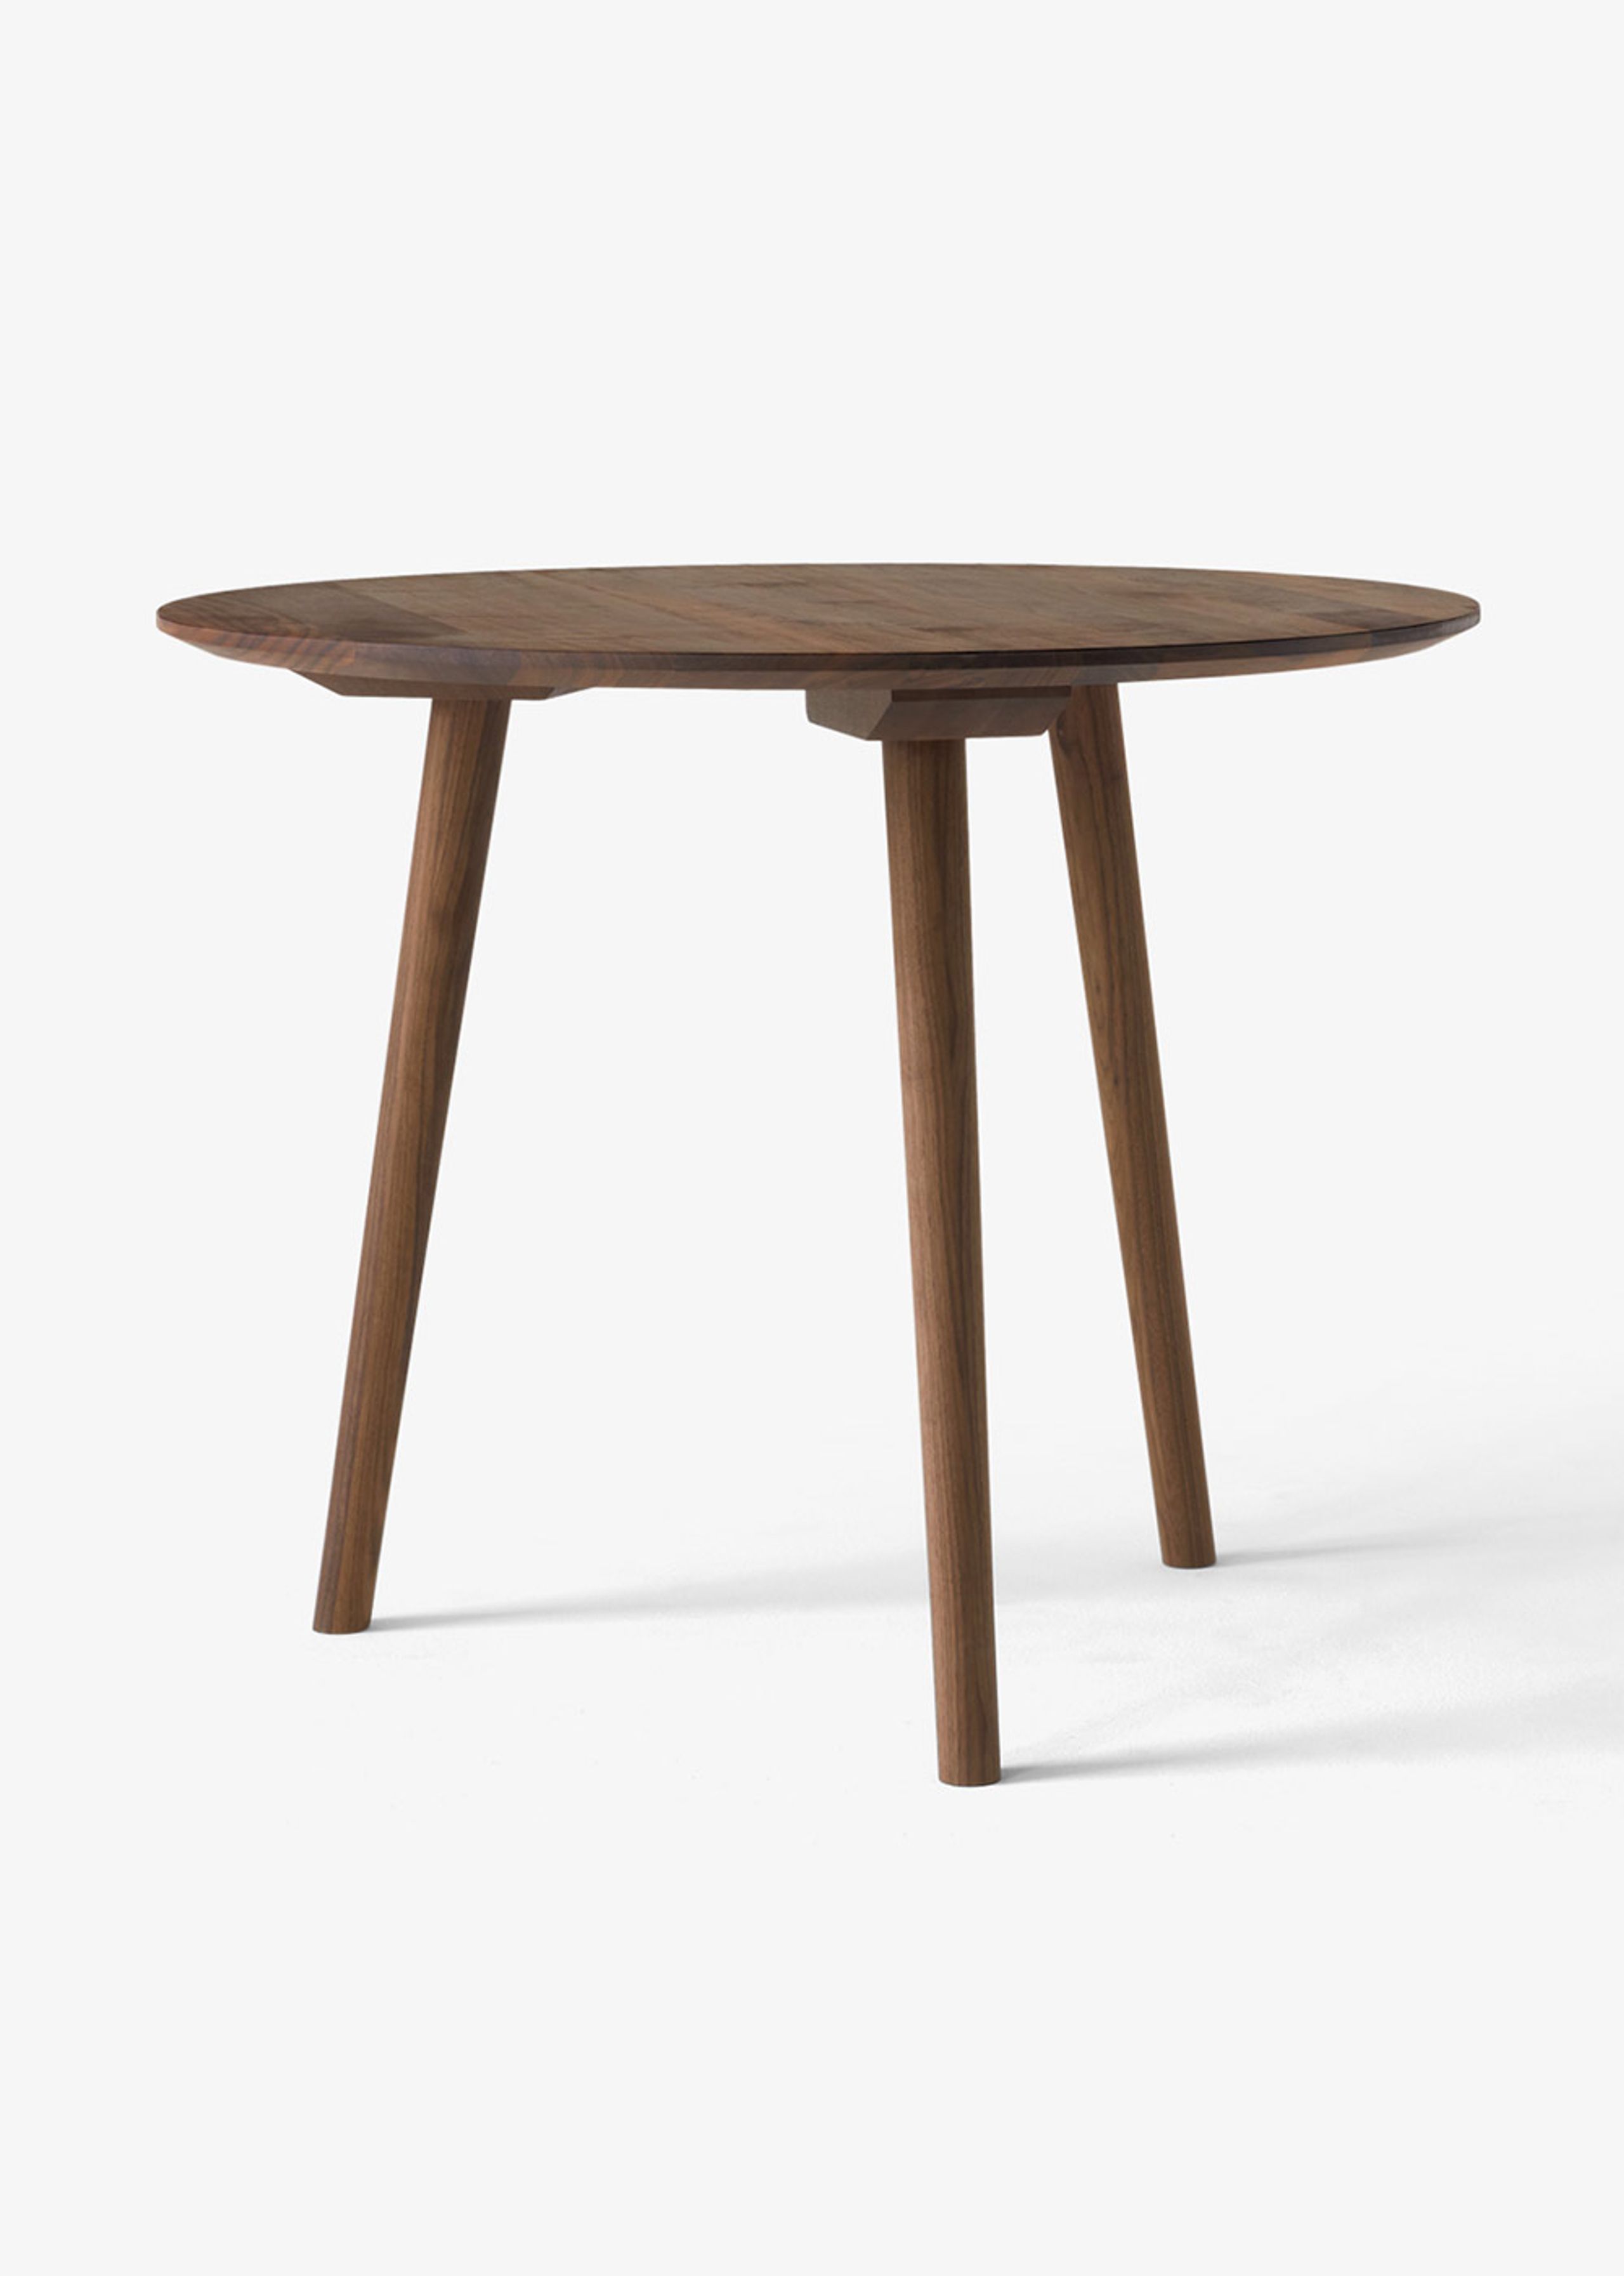 &tradition -  - In Between Table- SK3 - Oiled walnut